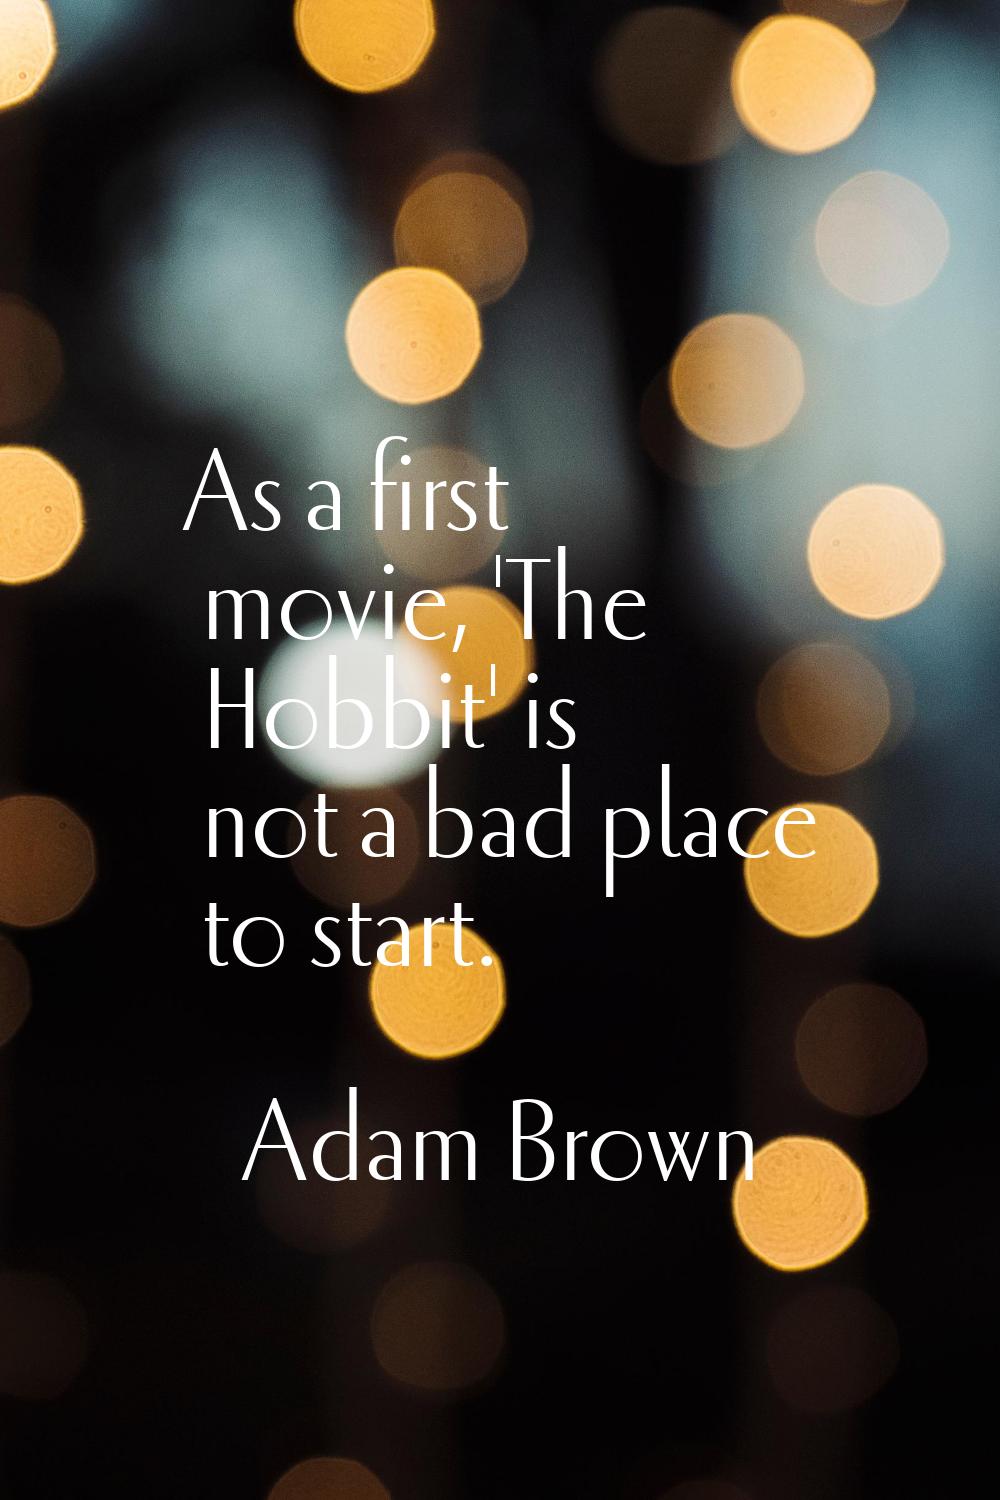 As a first movie, 'The Hobbit' is not a bad place to start.